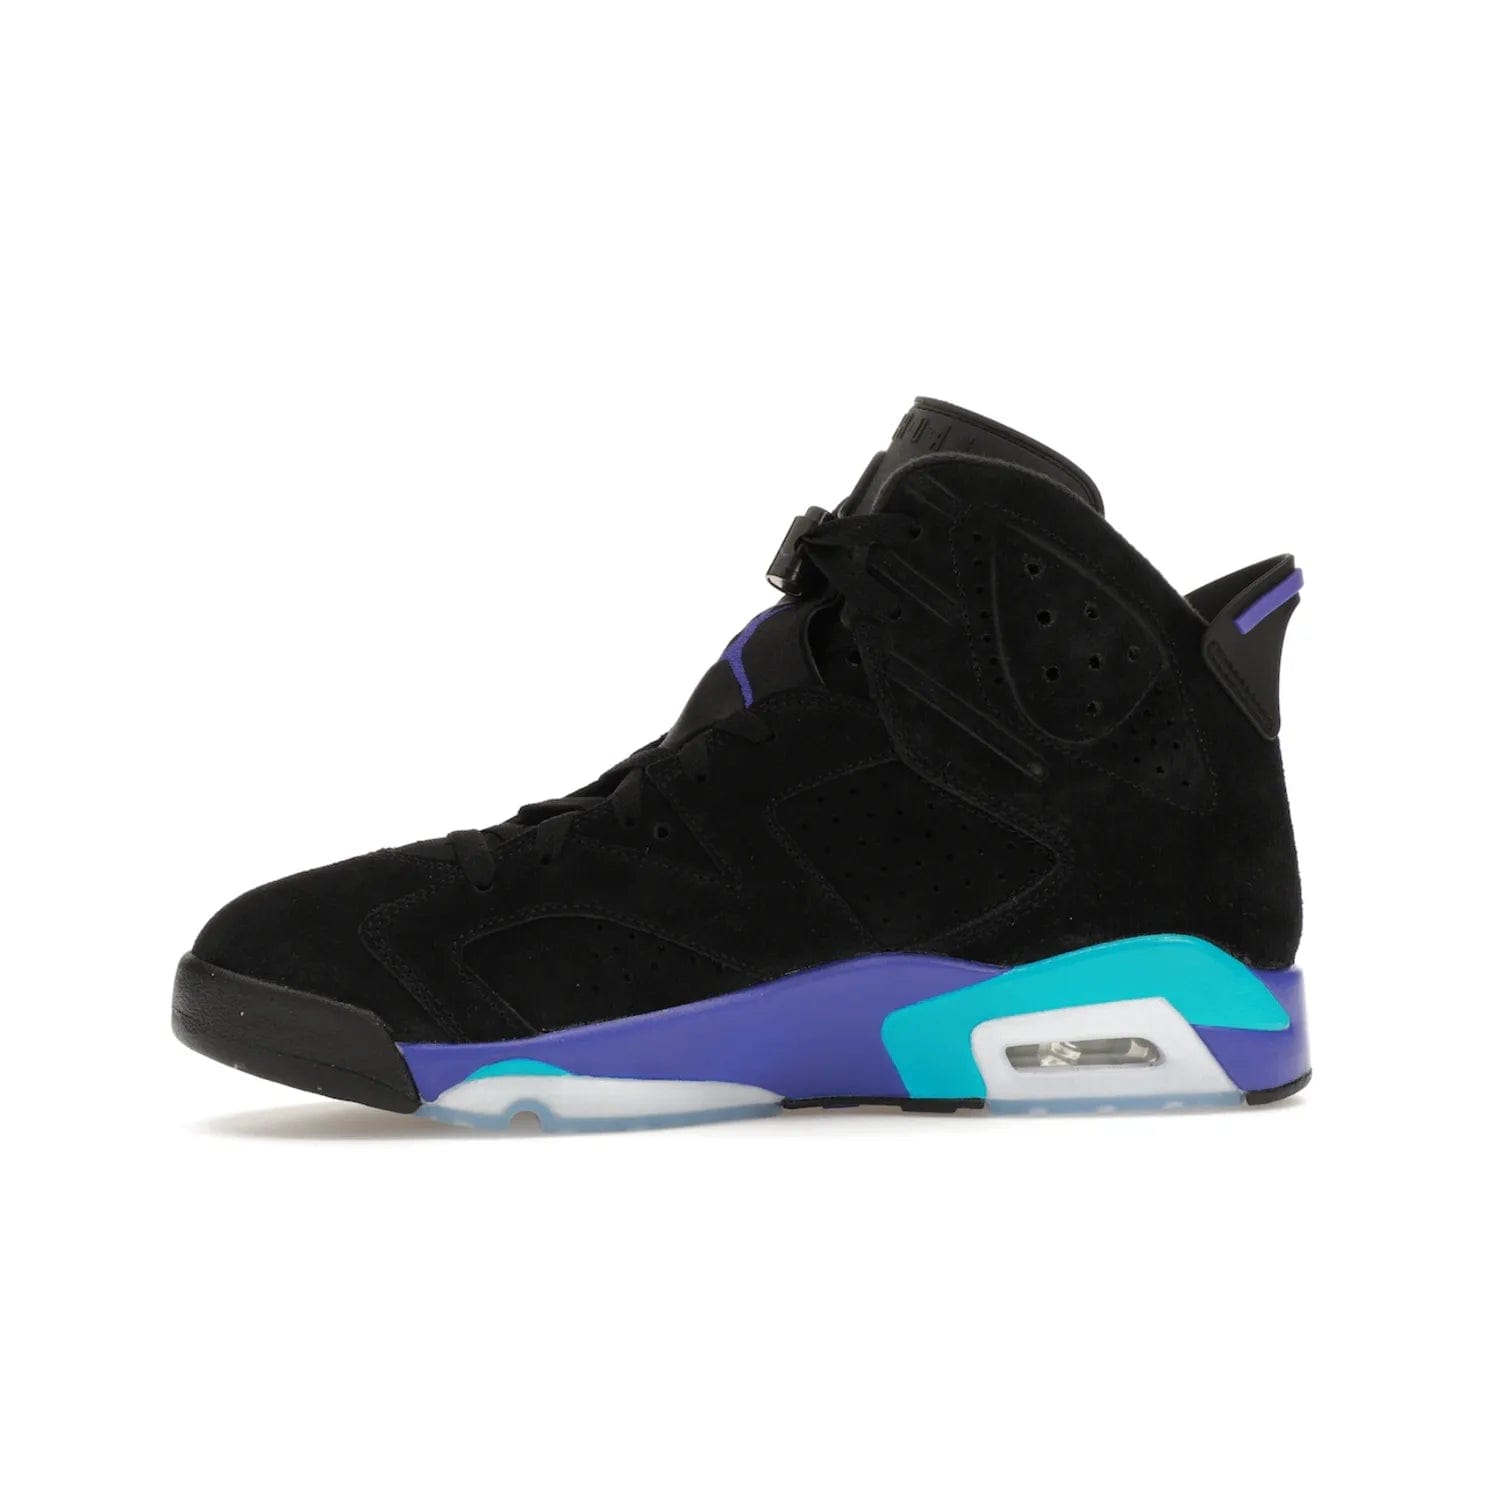 Jordan 6 Retro Aqua - Image 18 - Only at www.BallersClubKickz.com - Feel the classic Jordan 6 Retro Aqua paired with modern style. Black, Bright Concord, and Aquatone hues are crafted with a supple suede and rubberized heel tab. This standout sneaker adds signature Jordan elements at $200. Elevate your style with the Jordan 6 Retro Aqua.